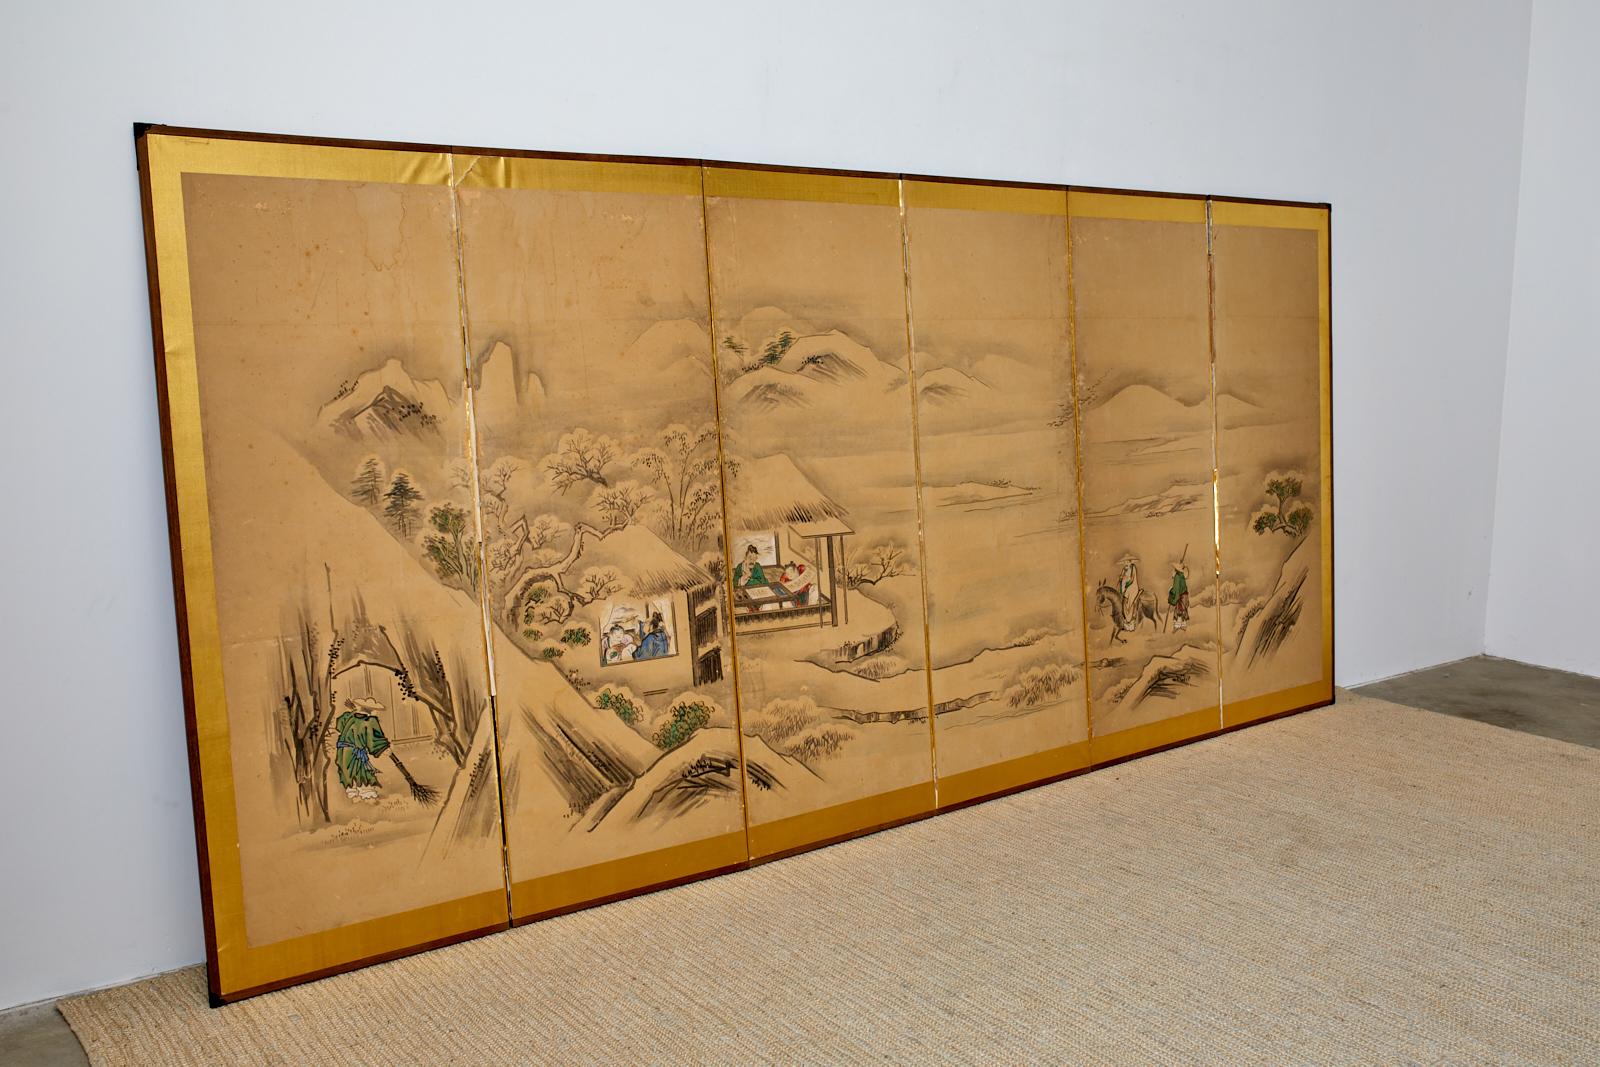 Large Japanese Meiji period six-panel screen depicting a winter landscape with a Chinese sage visiting friends in a country villa. Ink and vivid color pigments on mulberry paper mounted to a gilt background. Painted in the 19th century Kano school